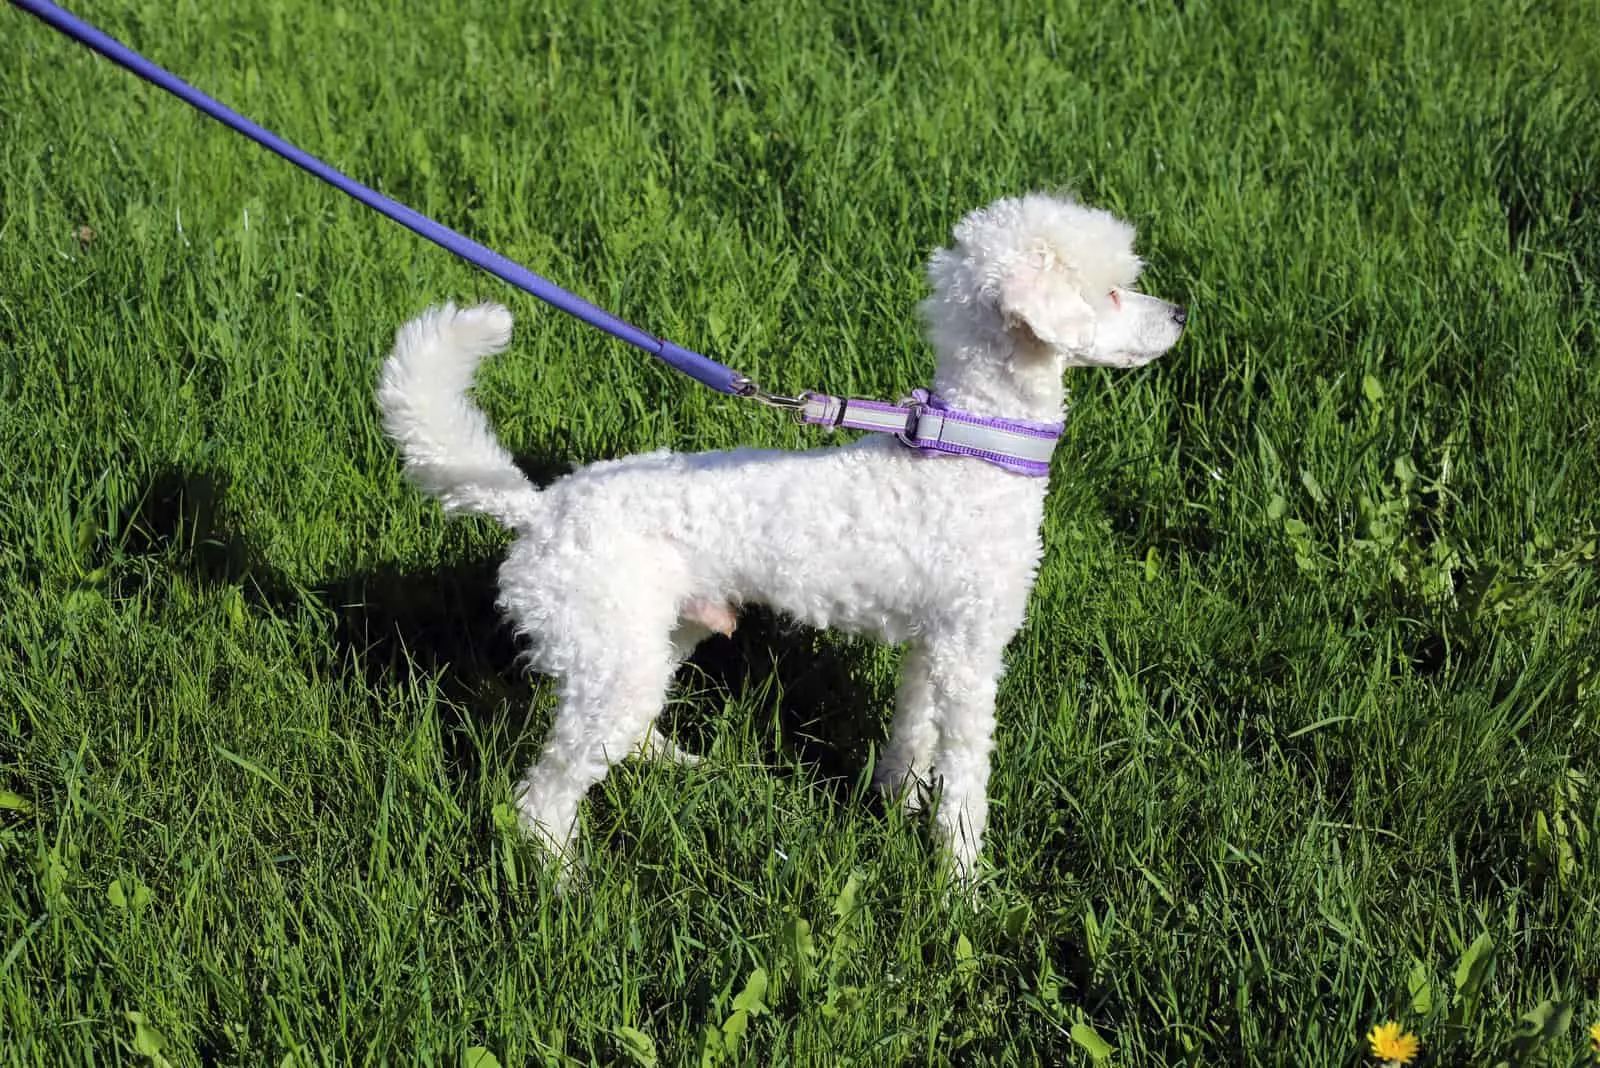 a white mini poodle on a leash stands on the grass